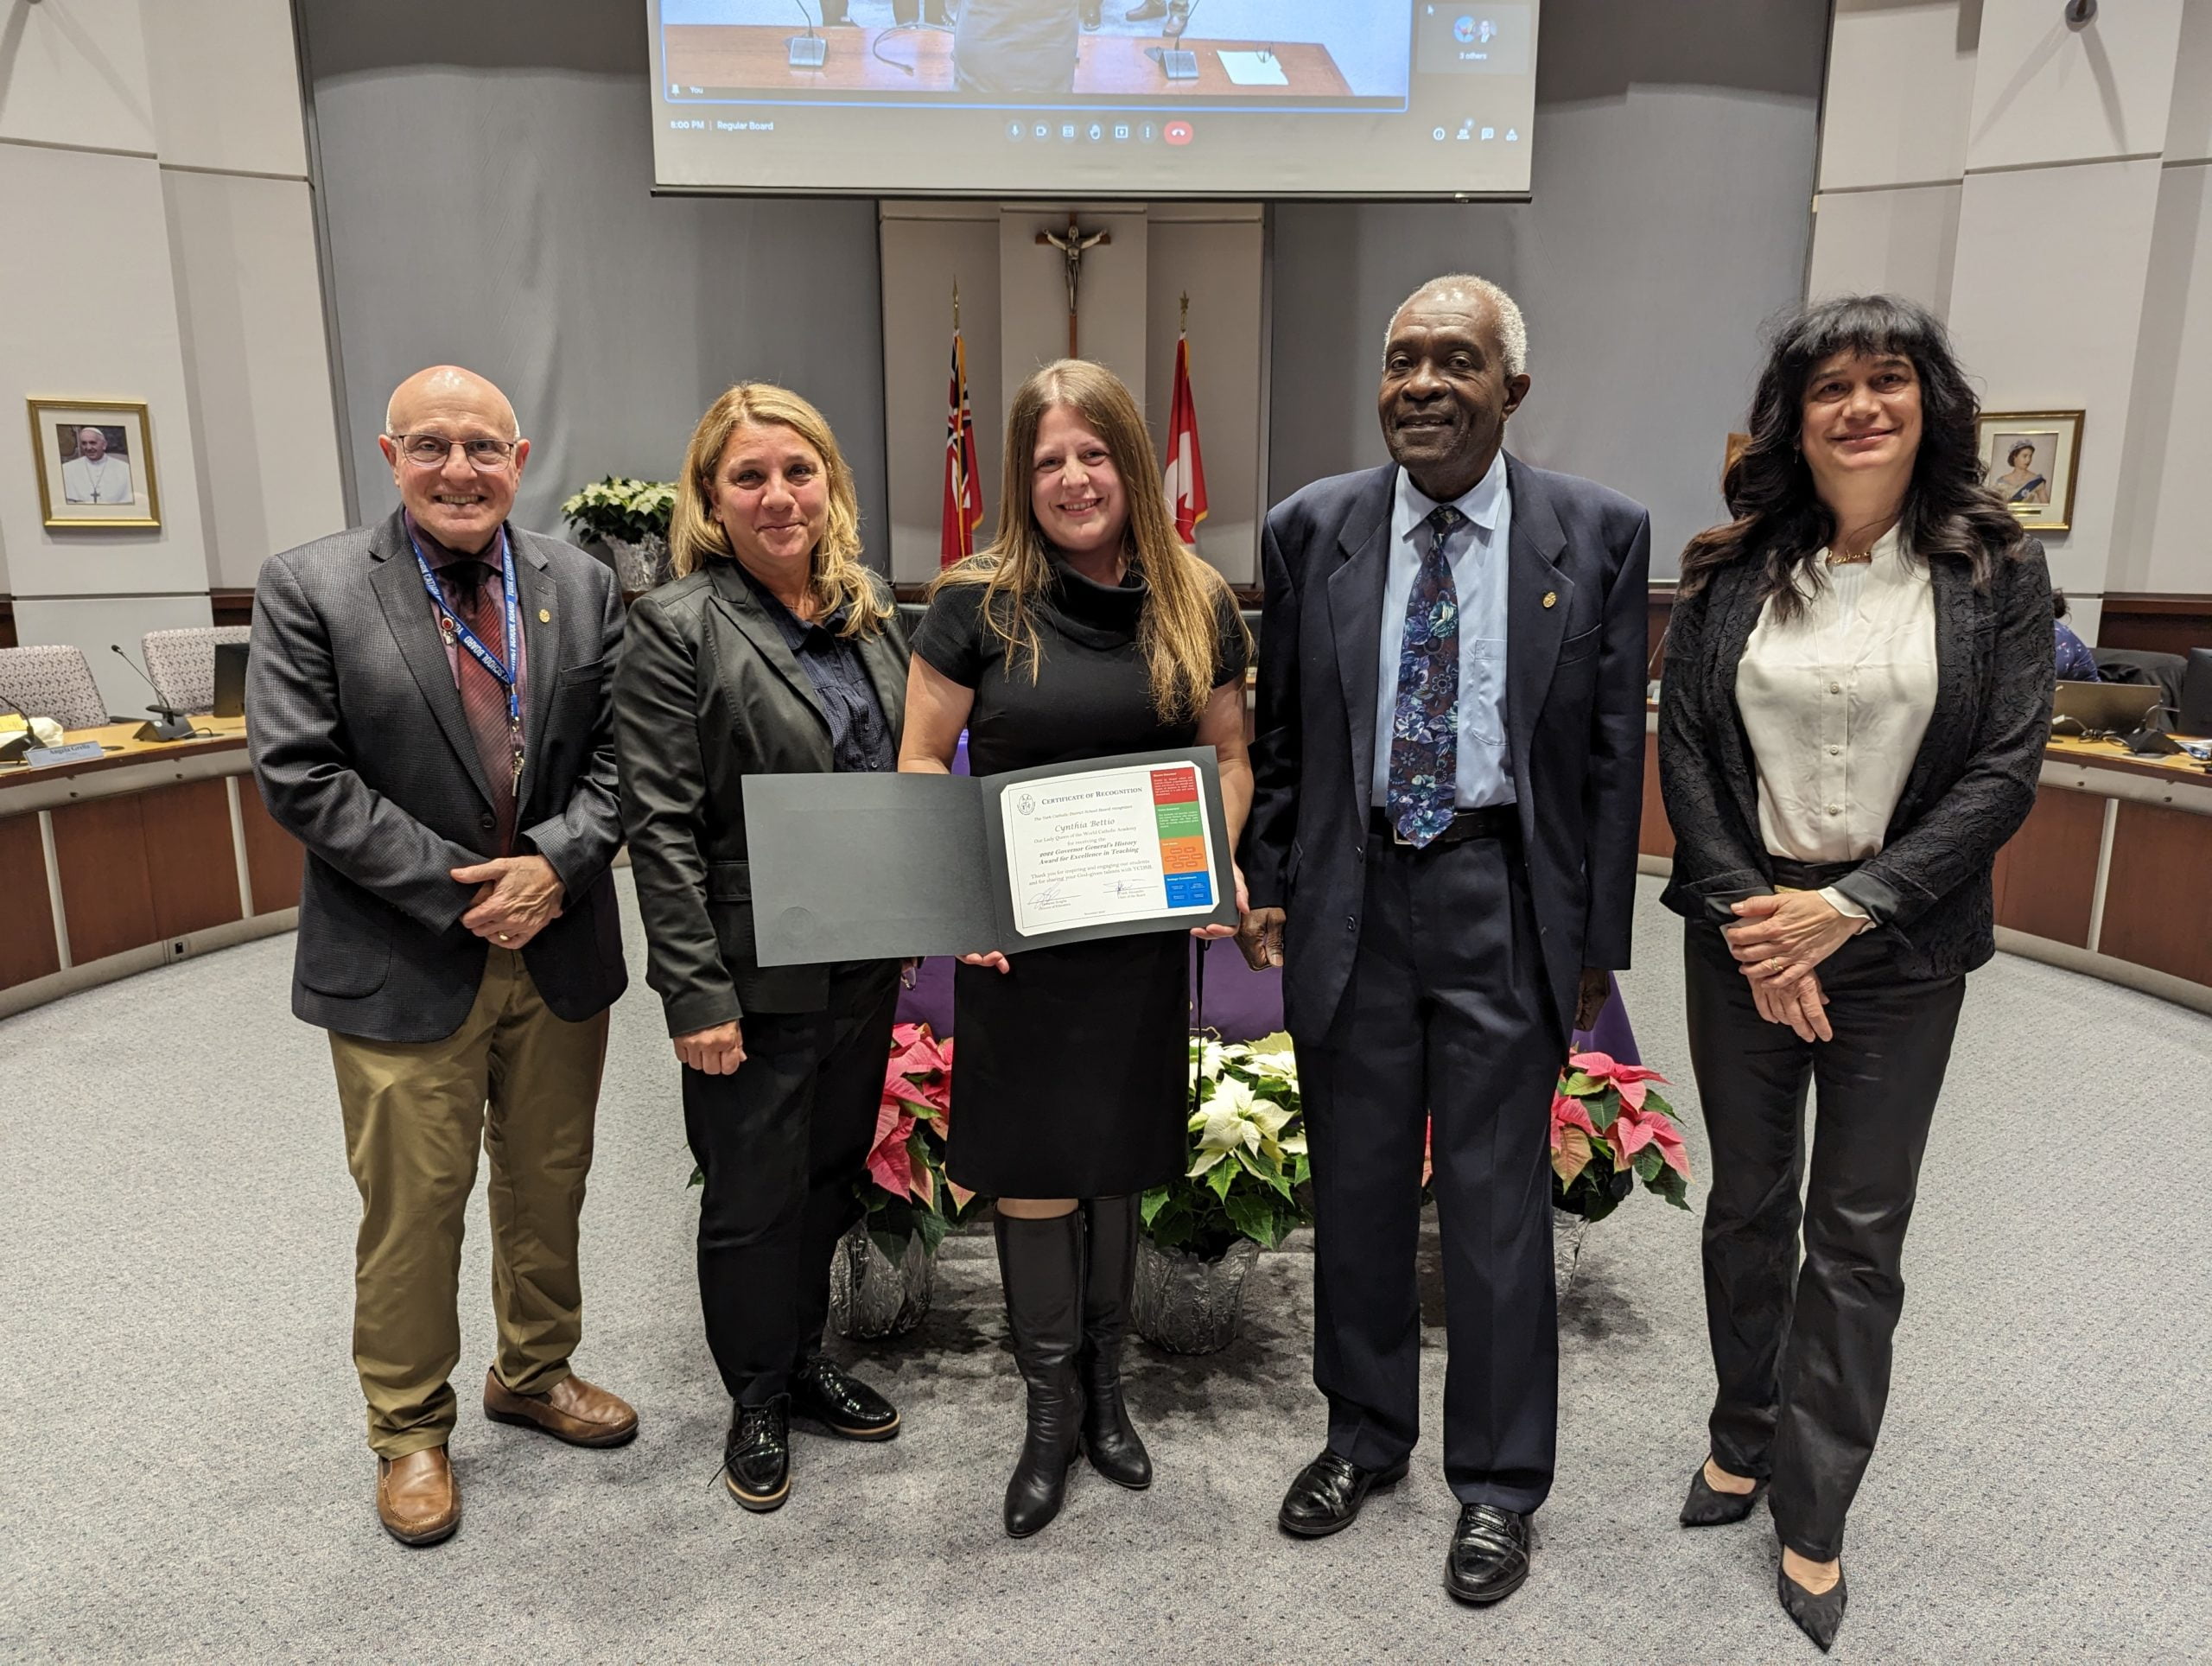 Cynthia Bettio is recognized at a YCDSB Trustee Meeting